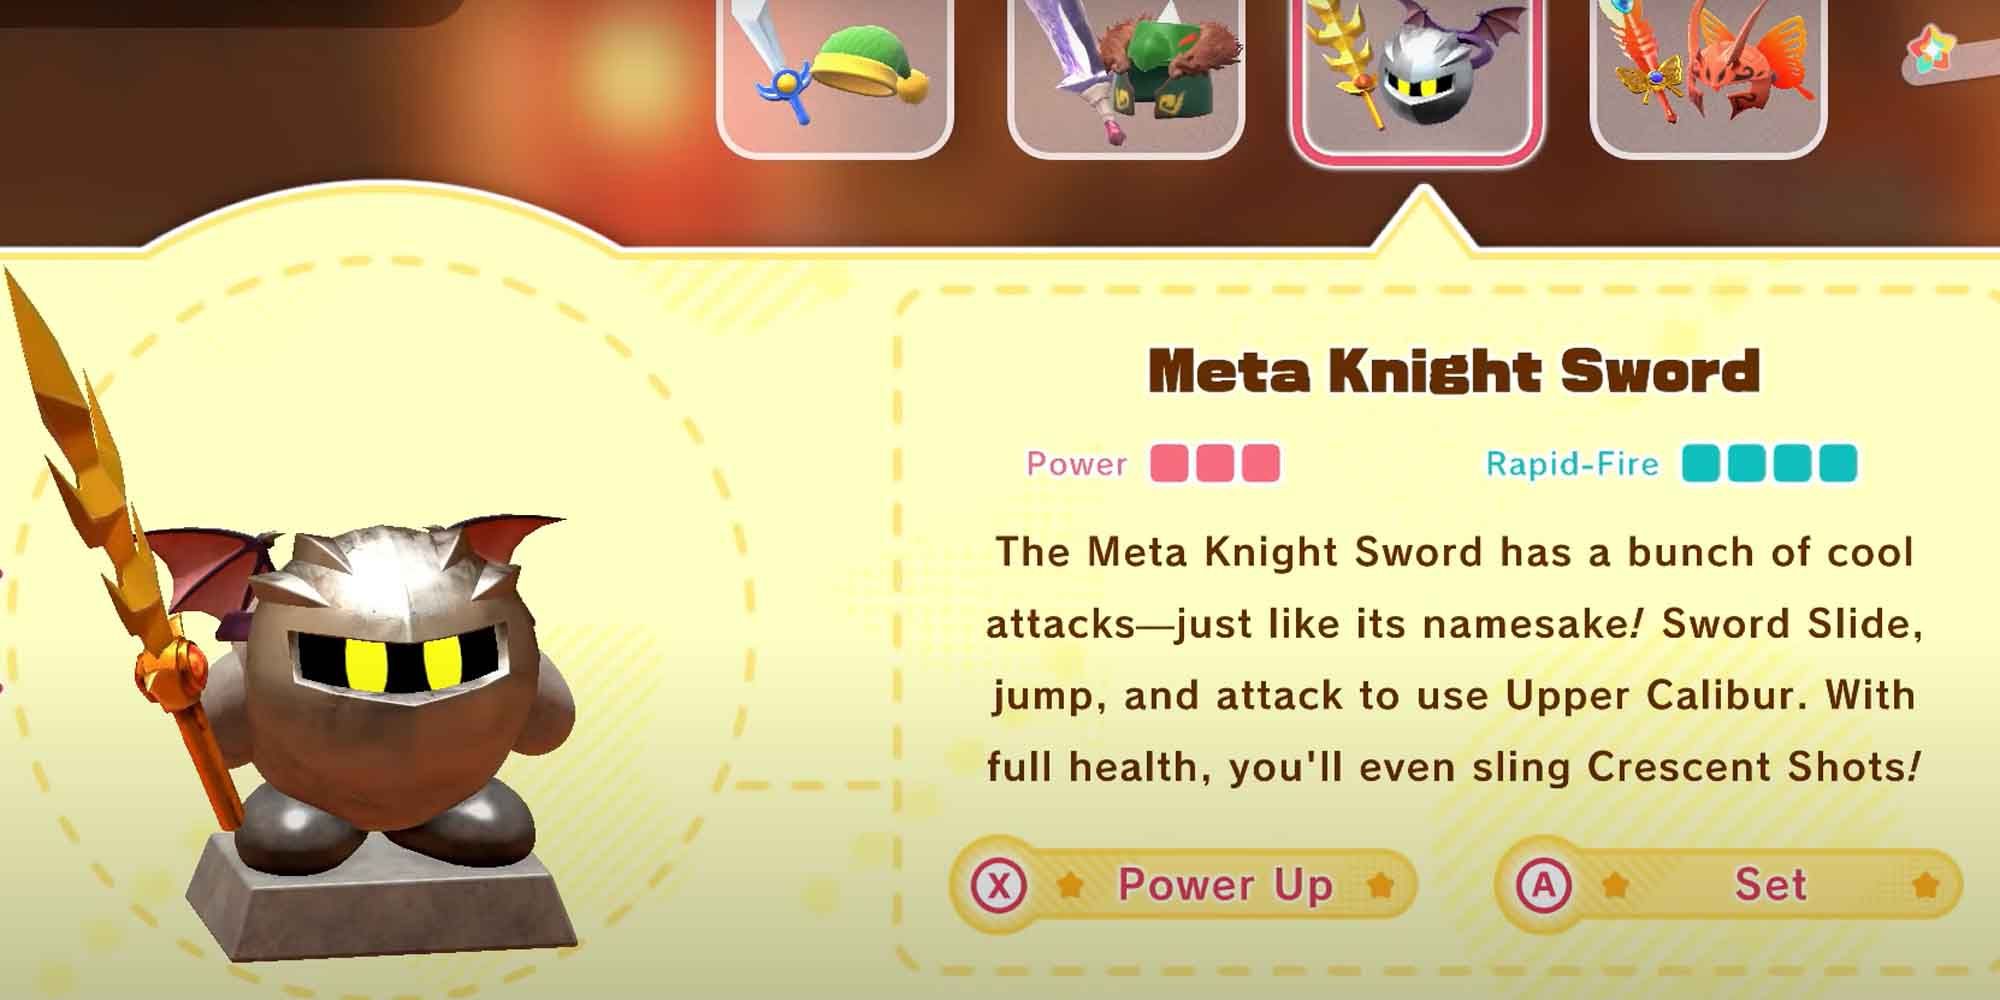 The Meta Knight Sword upgrade for the Sword copy ability in Kirby and the Forgotten Land